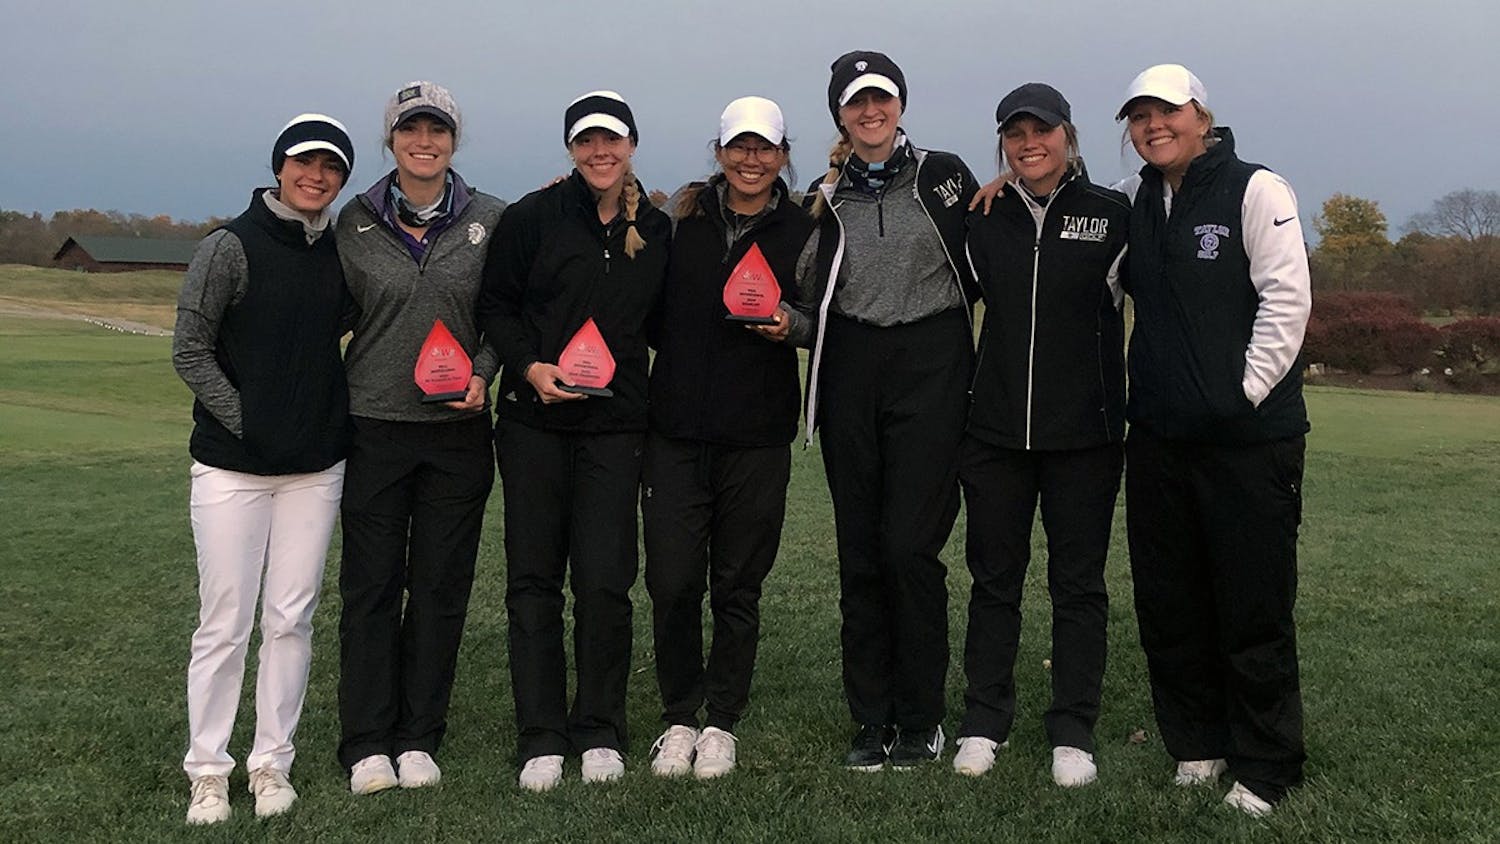 Both the men’s and women’s golf teams took first at the Purgatory Invitational